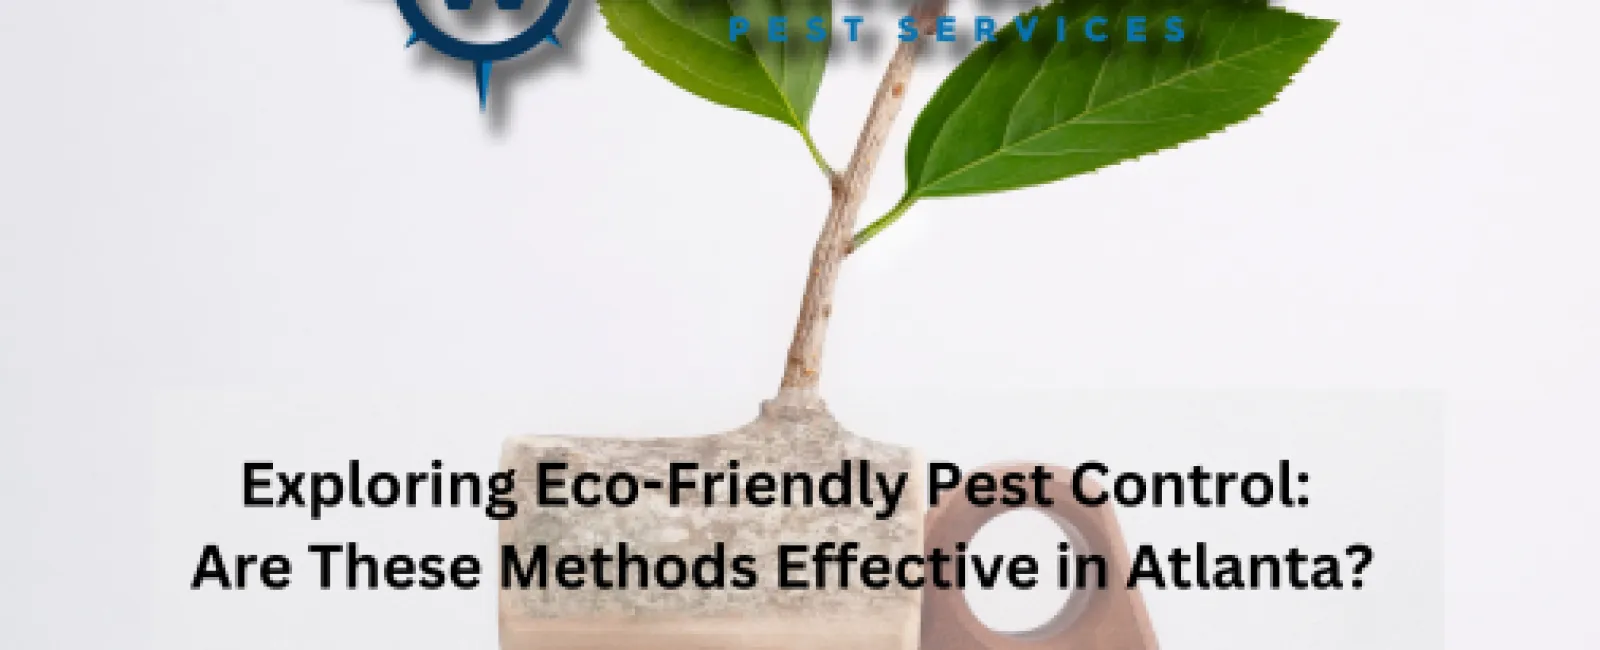 Exploring Eco-Friendly Pest Control: Are These Methods Effective in Atlanta?